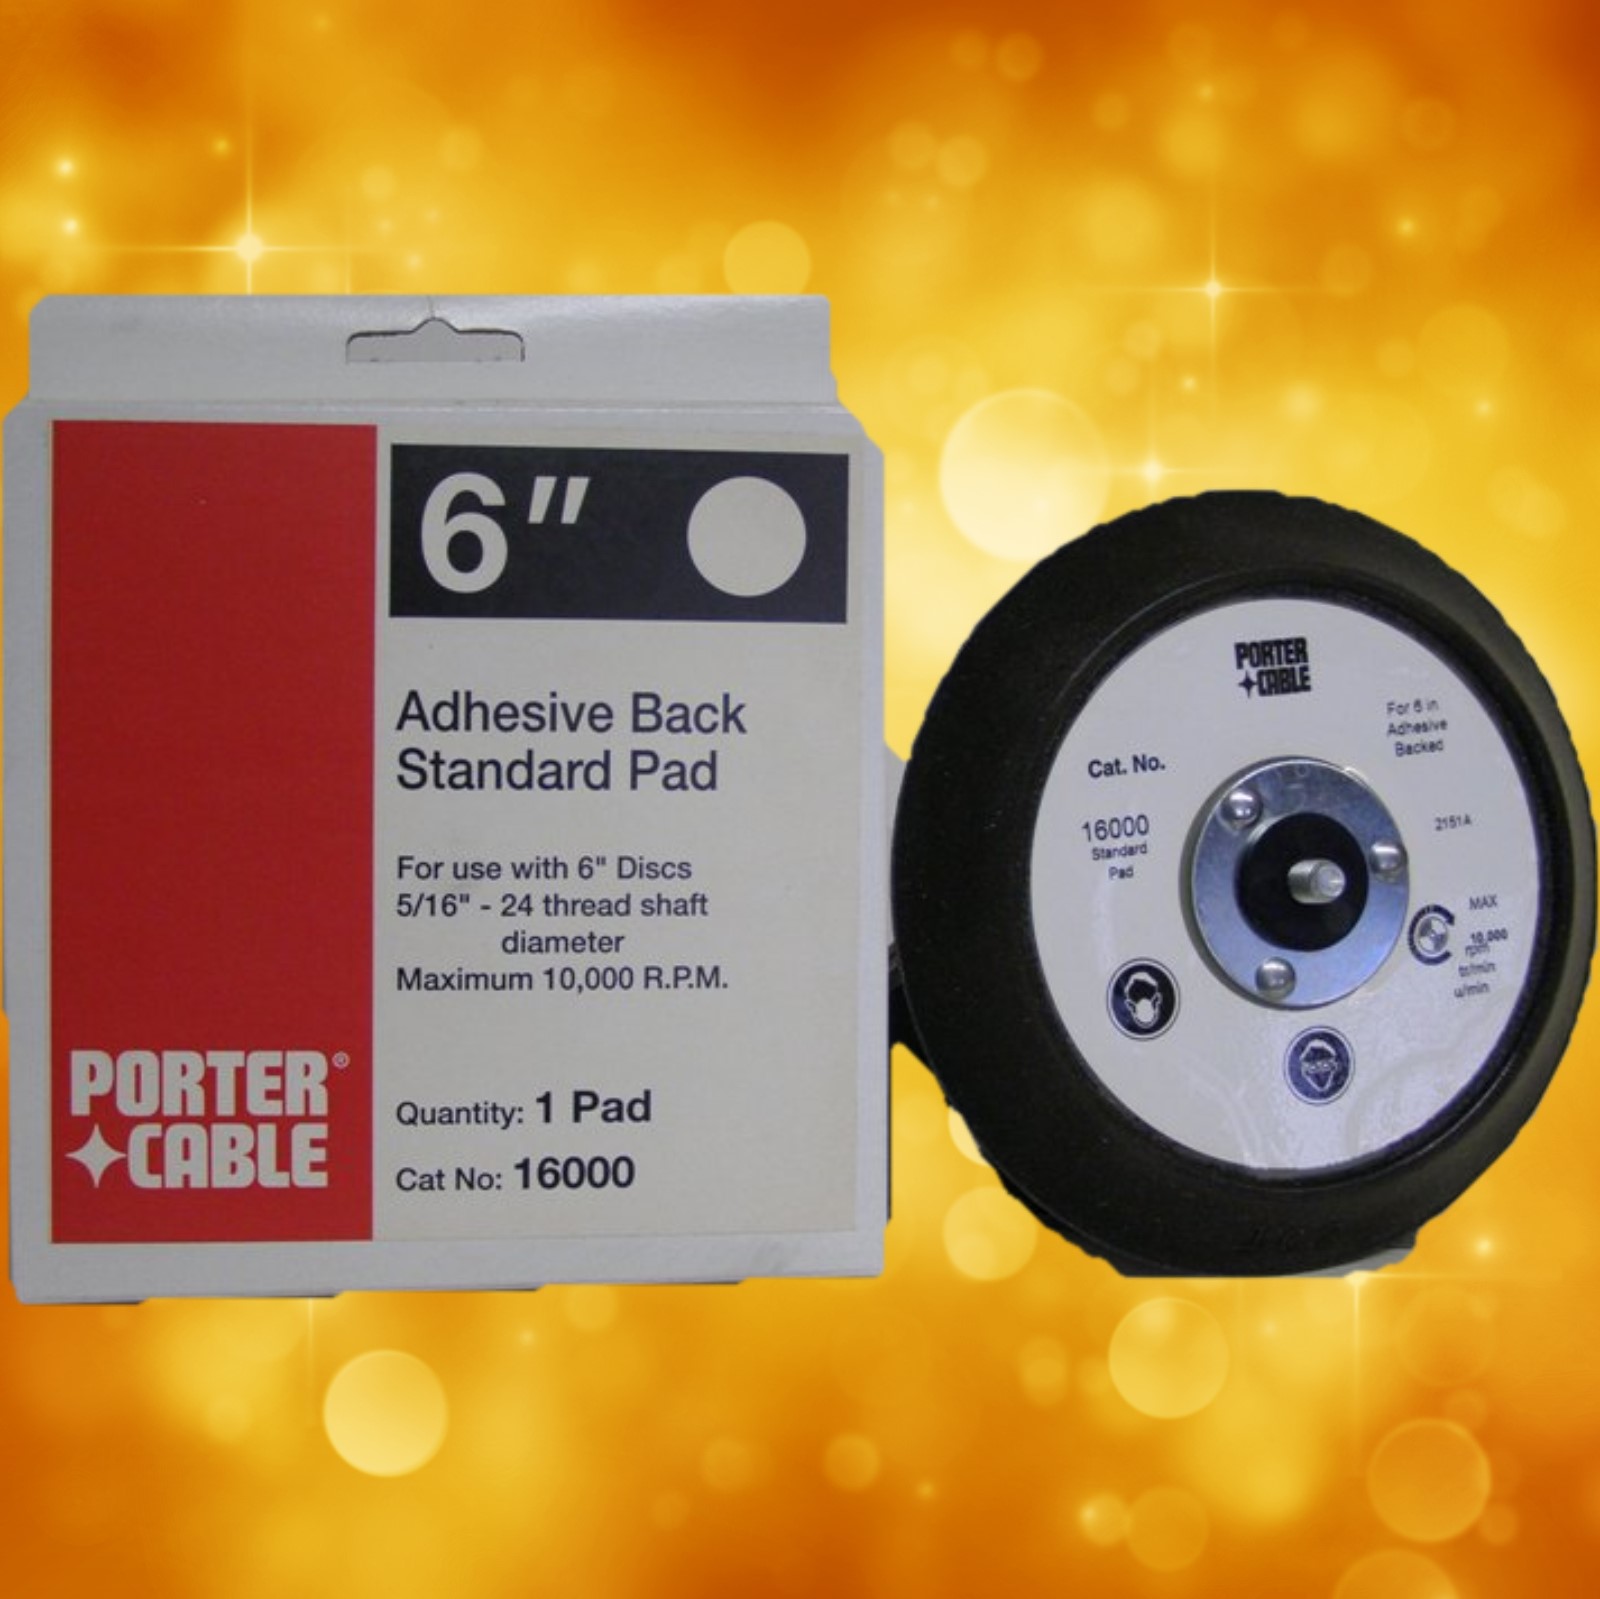 Porter Cable 6" Standard Adhesive-Back Replacement Pad 16000